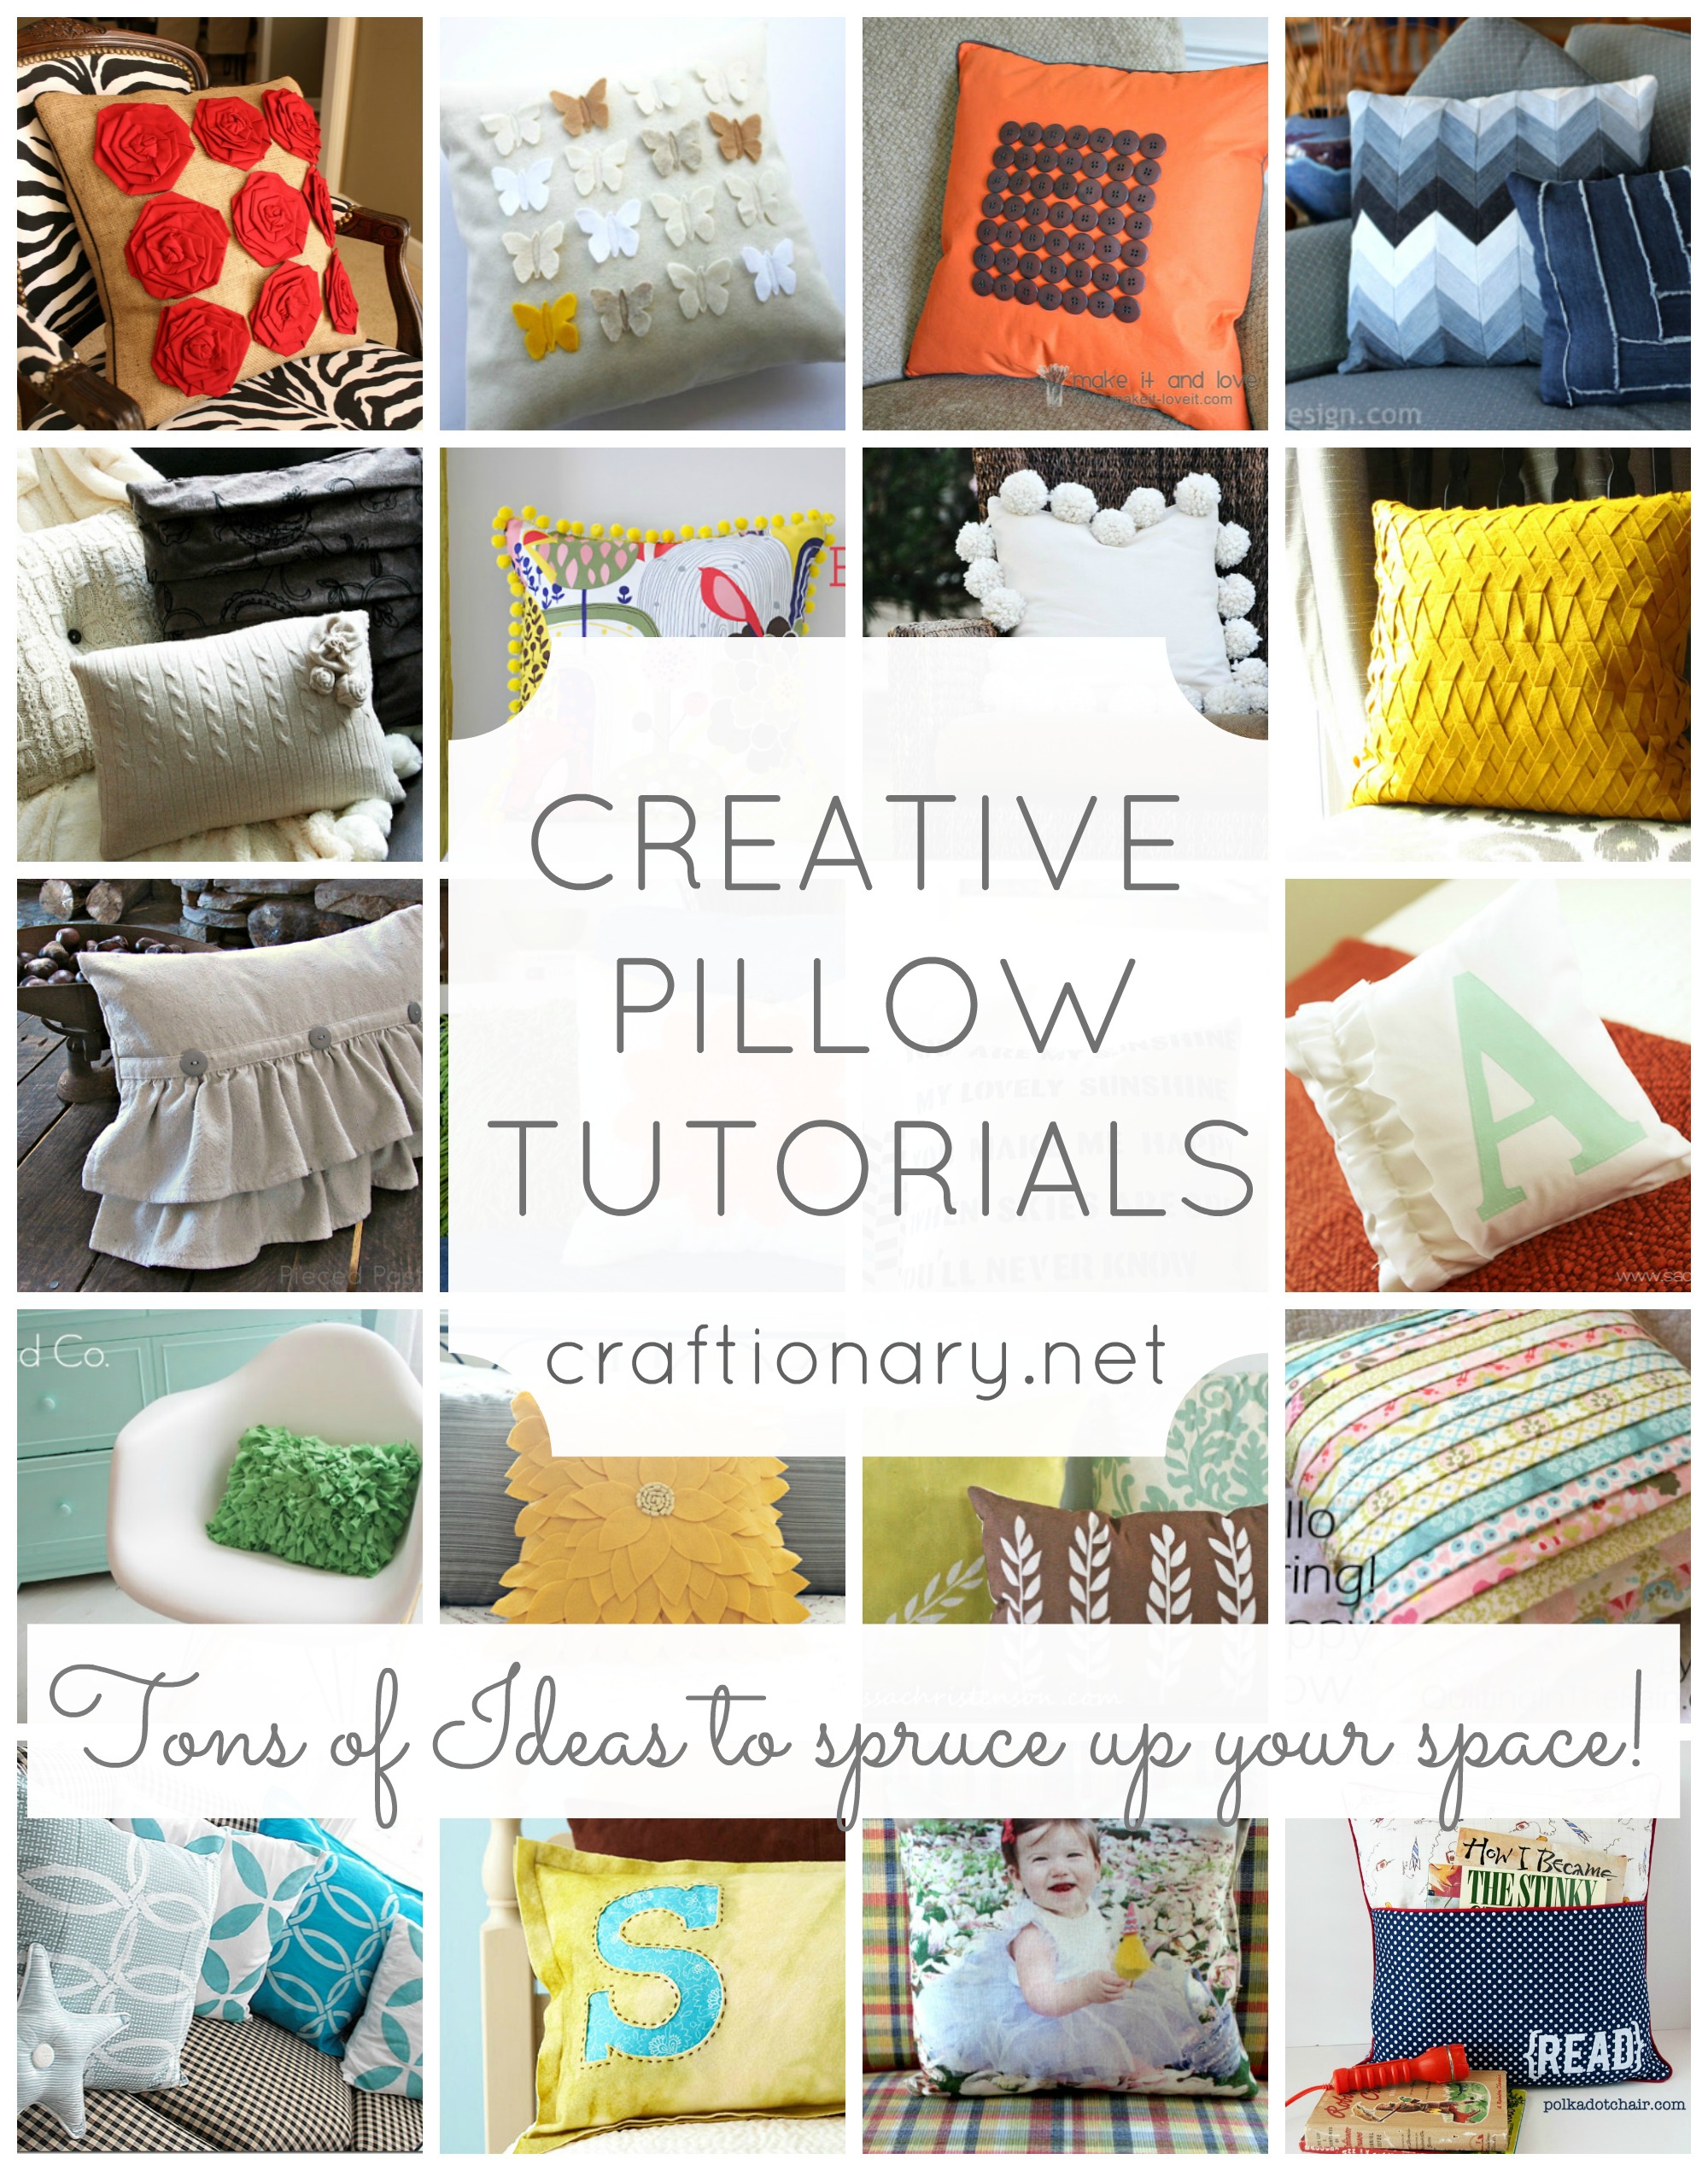 How to Style Throw Pillows Guide: Decorative Pillow Styling Ideas